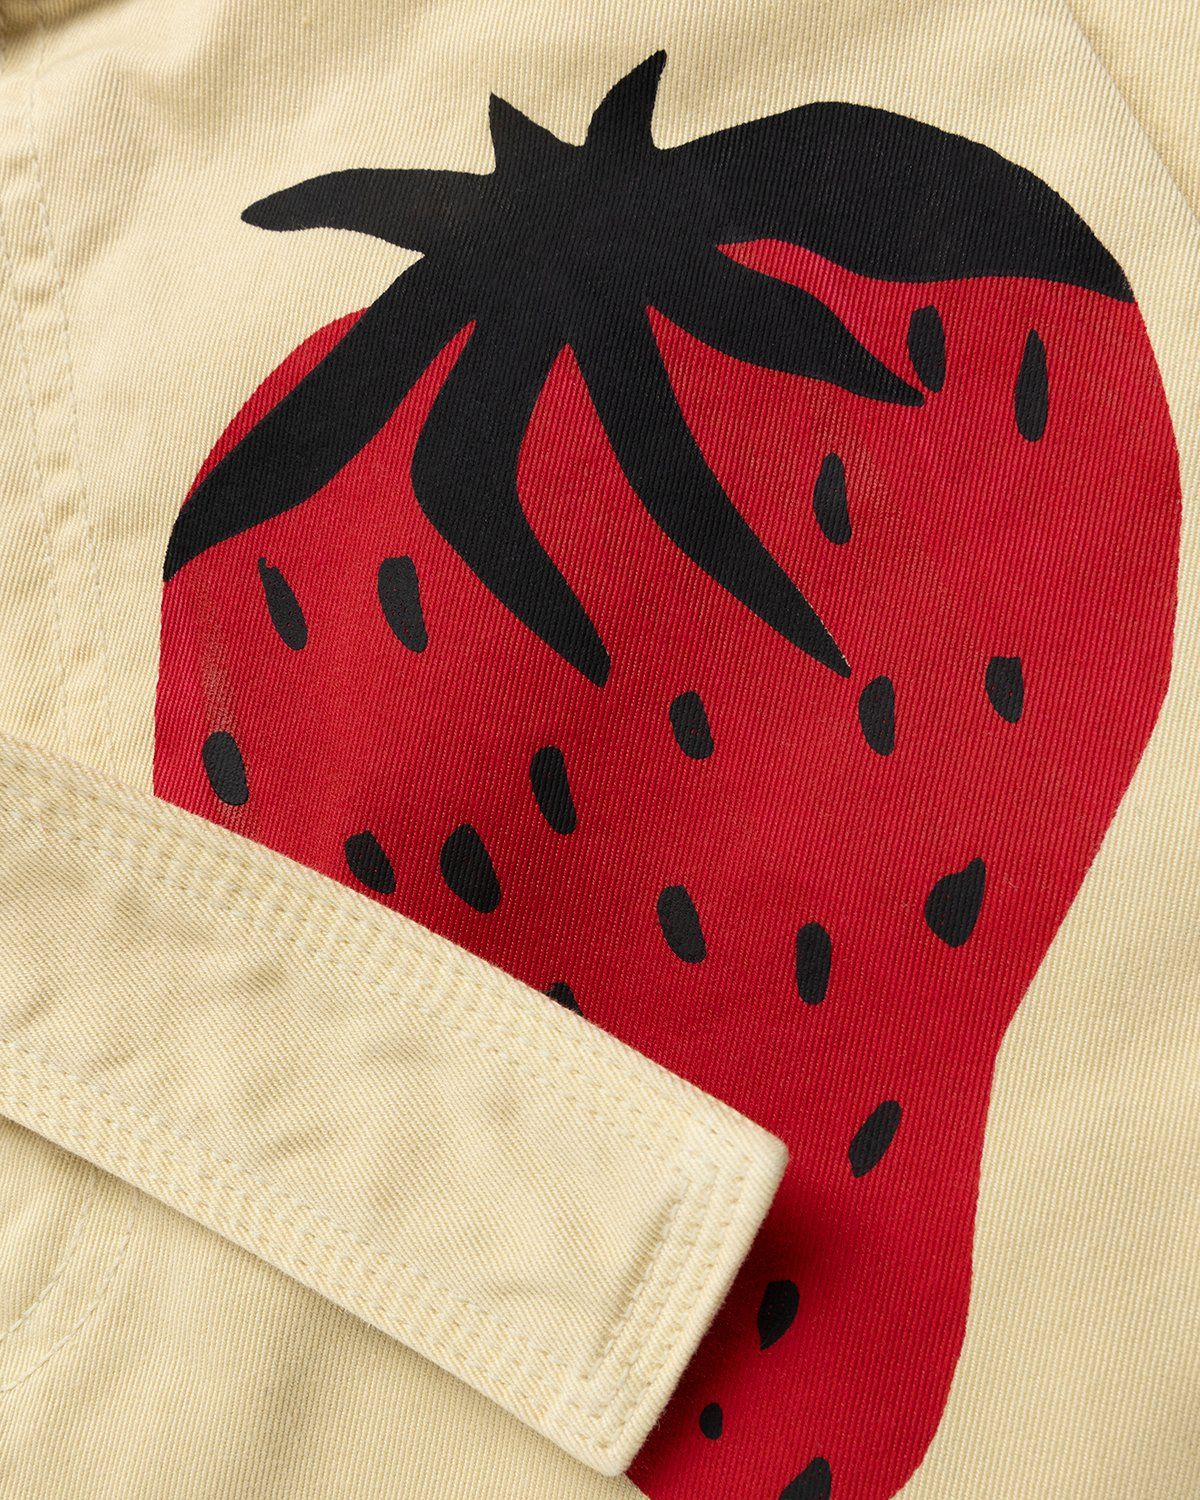 J.W. Anderson – Strawberry Chino Shorts Natural/Red - Shorts - Beige - Image 5